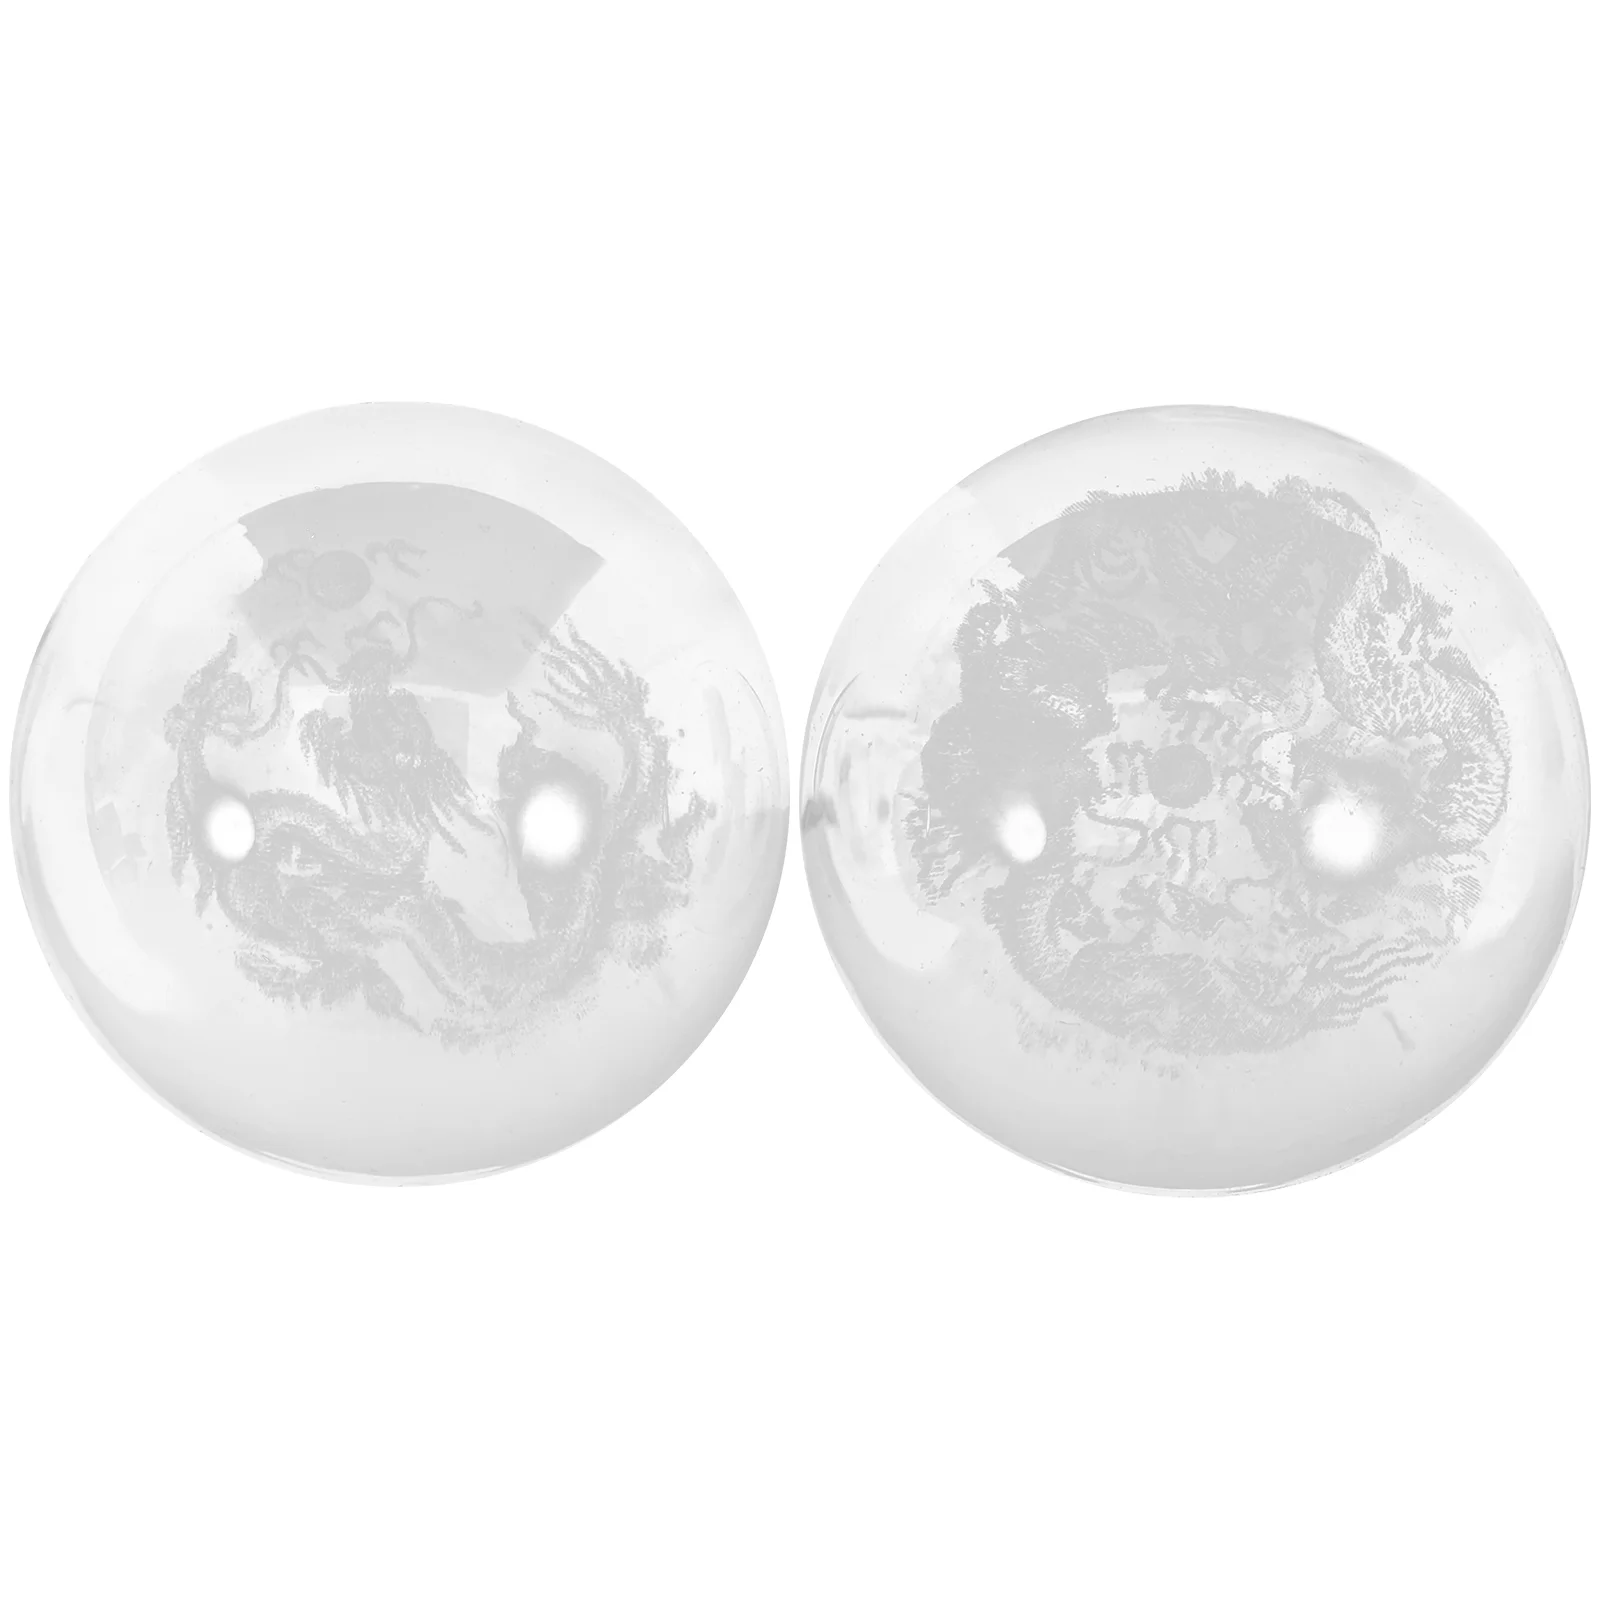 2pcs Handheld Massage Balls Portable Balls Smooth  Massage Balls Hand Playing Balls round paperweight 2pcs portable brass paper weight student metal chinese brush pen ink painting calligraphy paper weight